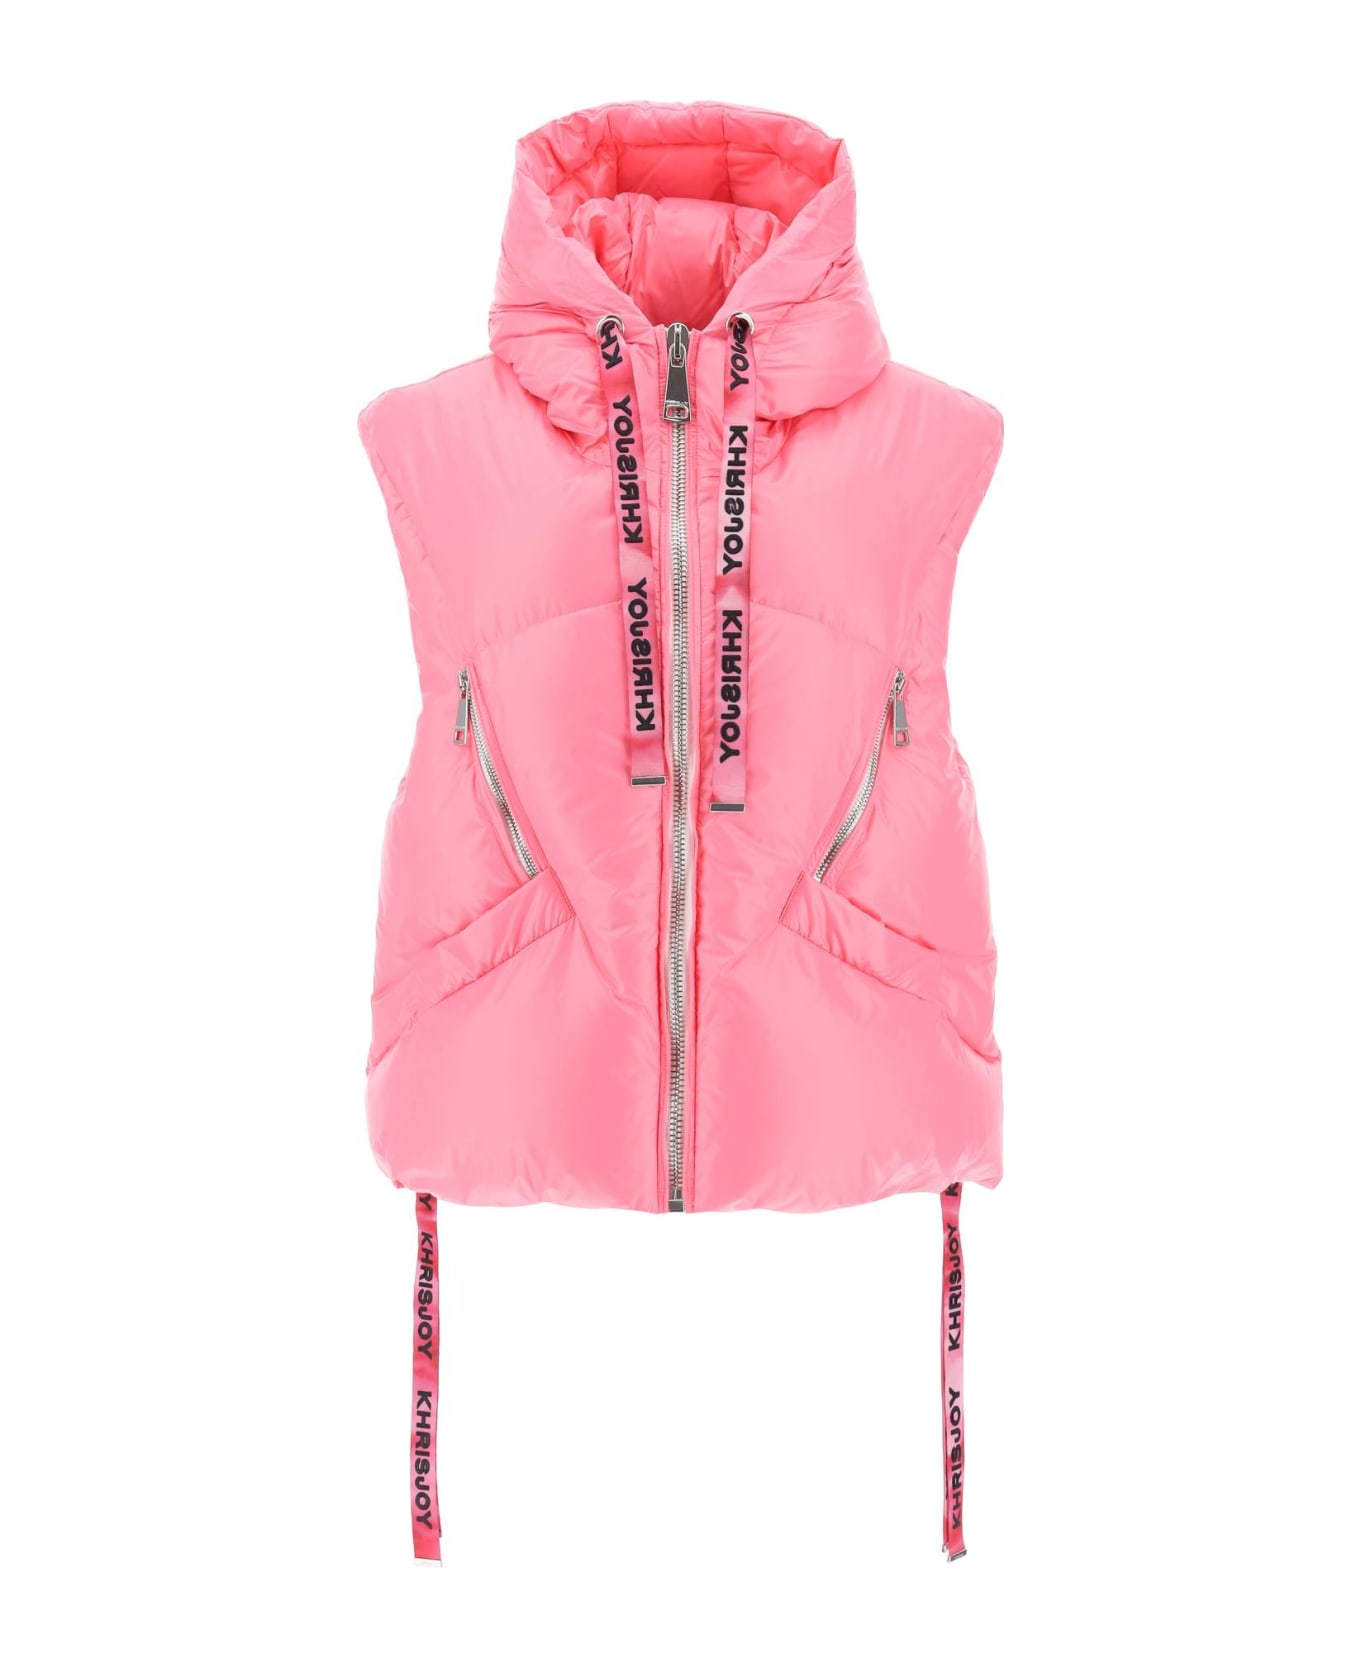 Khrisjoy Oversized Puffer Vest With Hood - FLAMINGO PINK (Pink)